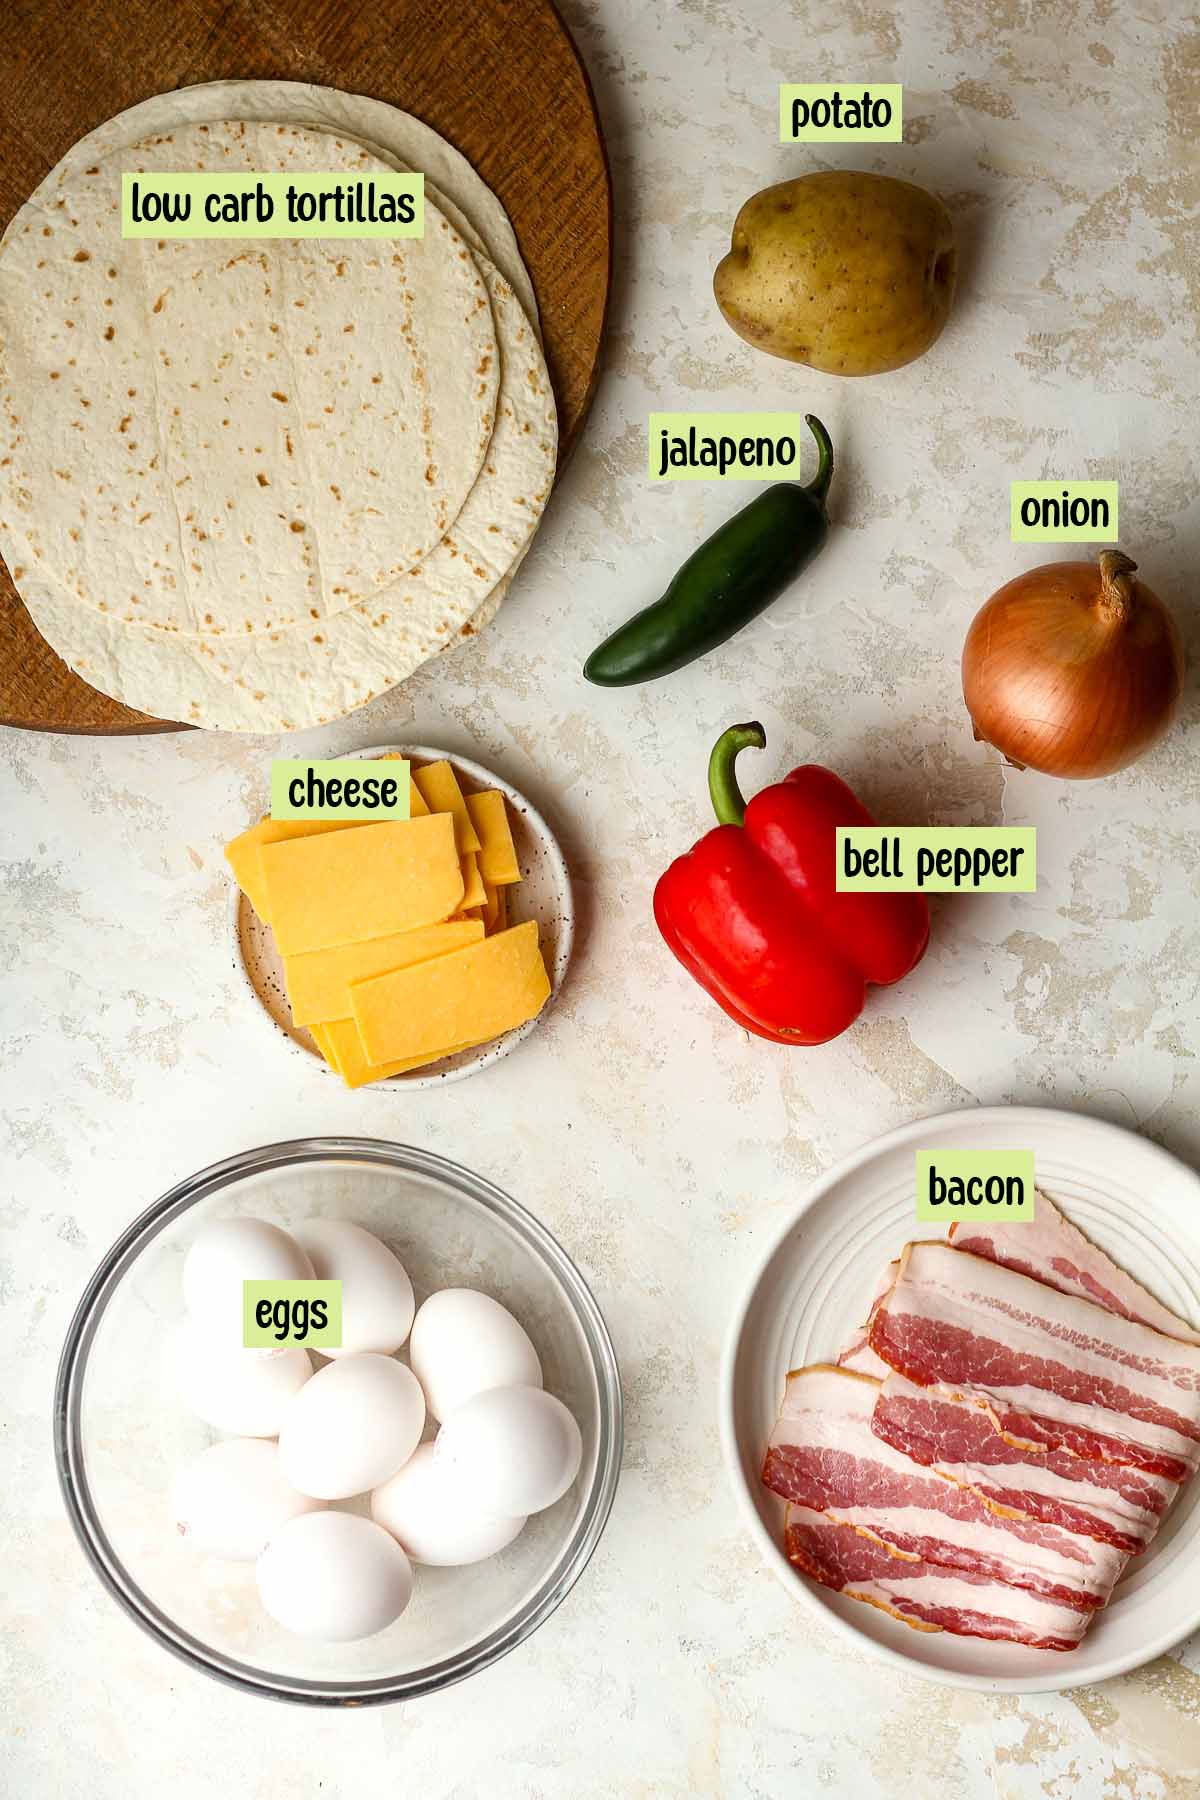 Labeled ingredients for the breakfast burritos.